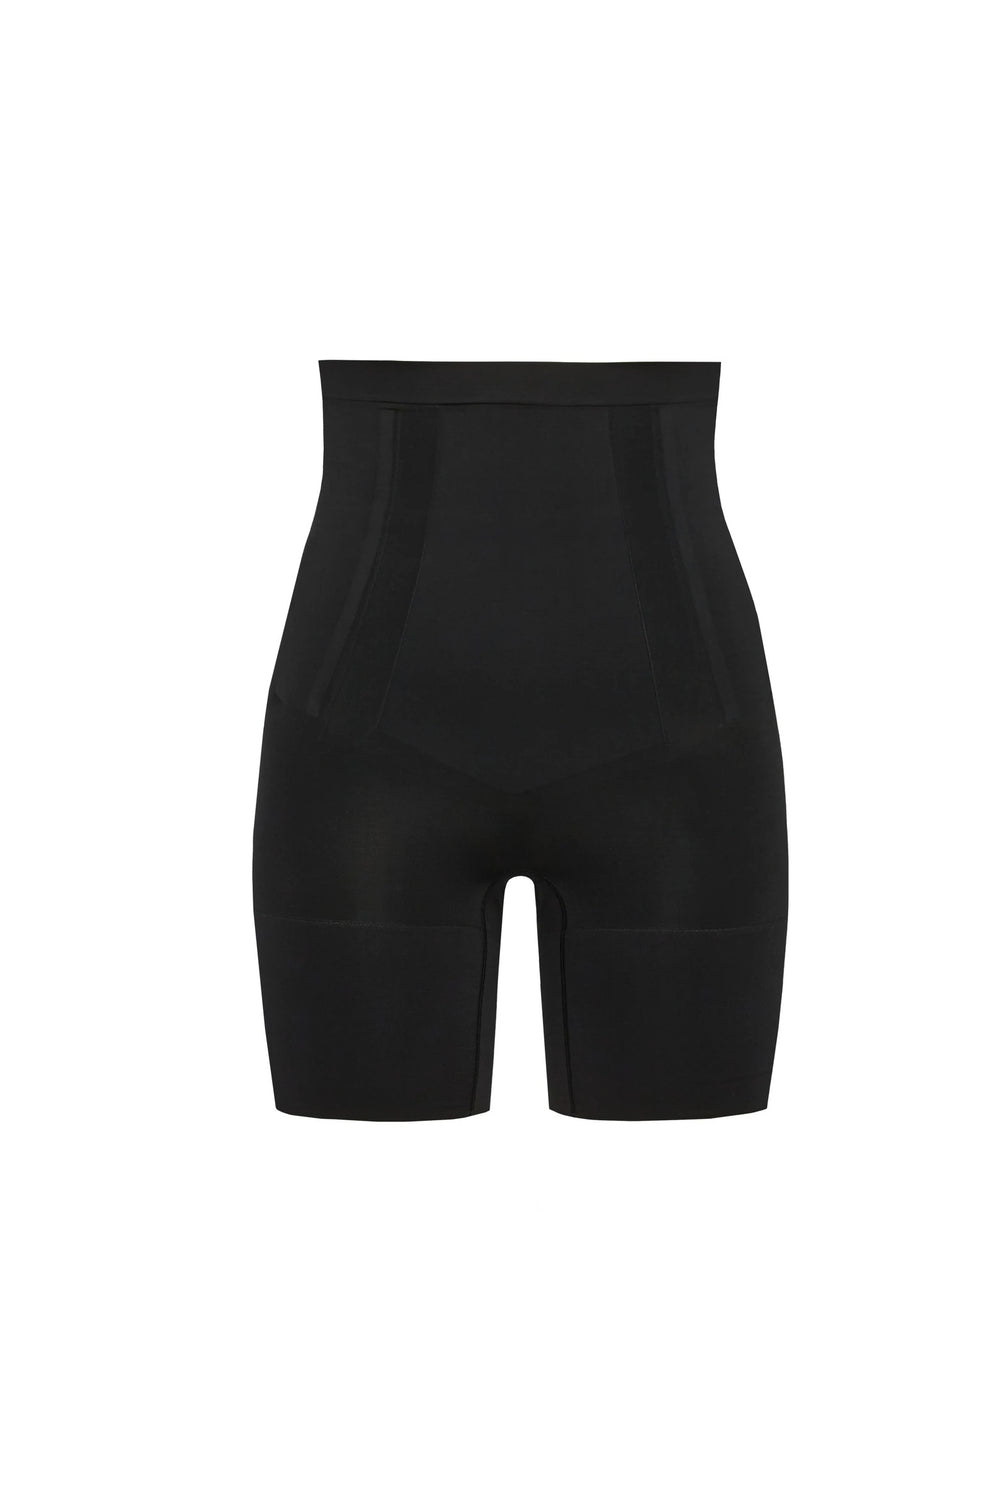 Thinstincts 2.0 High-Waisted Mid Thigh Shorts by Spanx Online, THE ICONIC